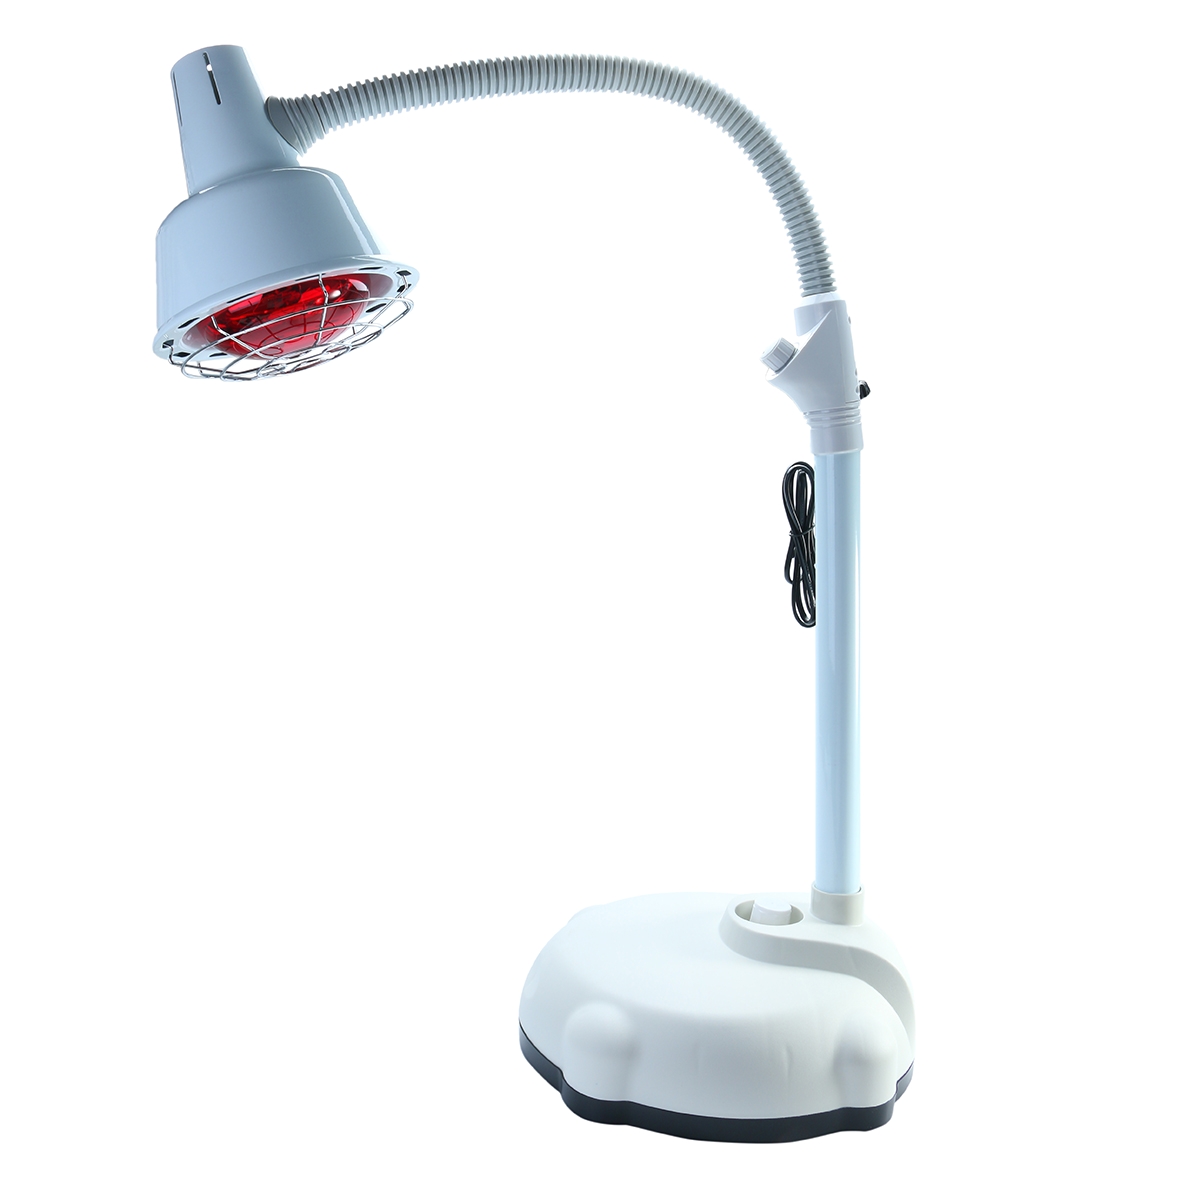 Salon Infrared Heat Lamp 275w Infrared therapy Tdp Infrared Ir Temperature Heat Lamp Health